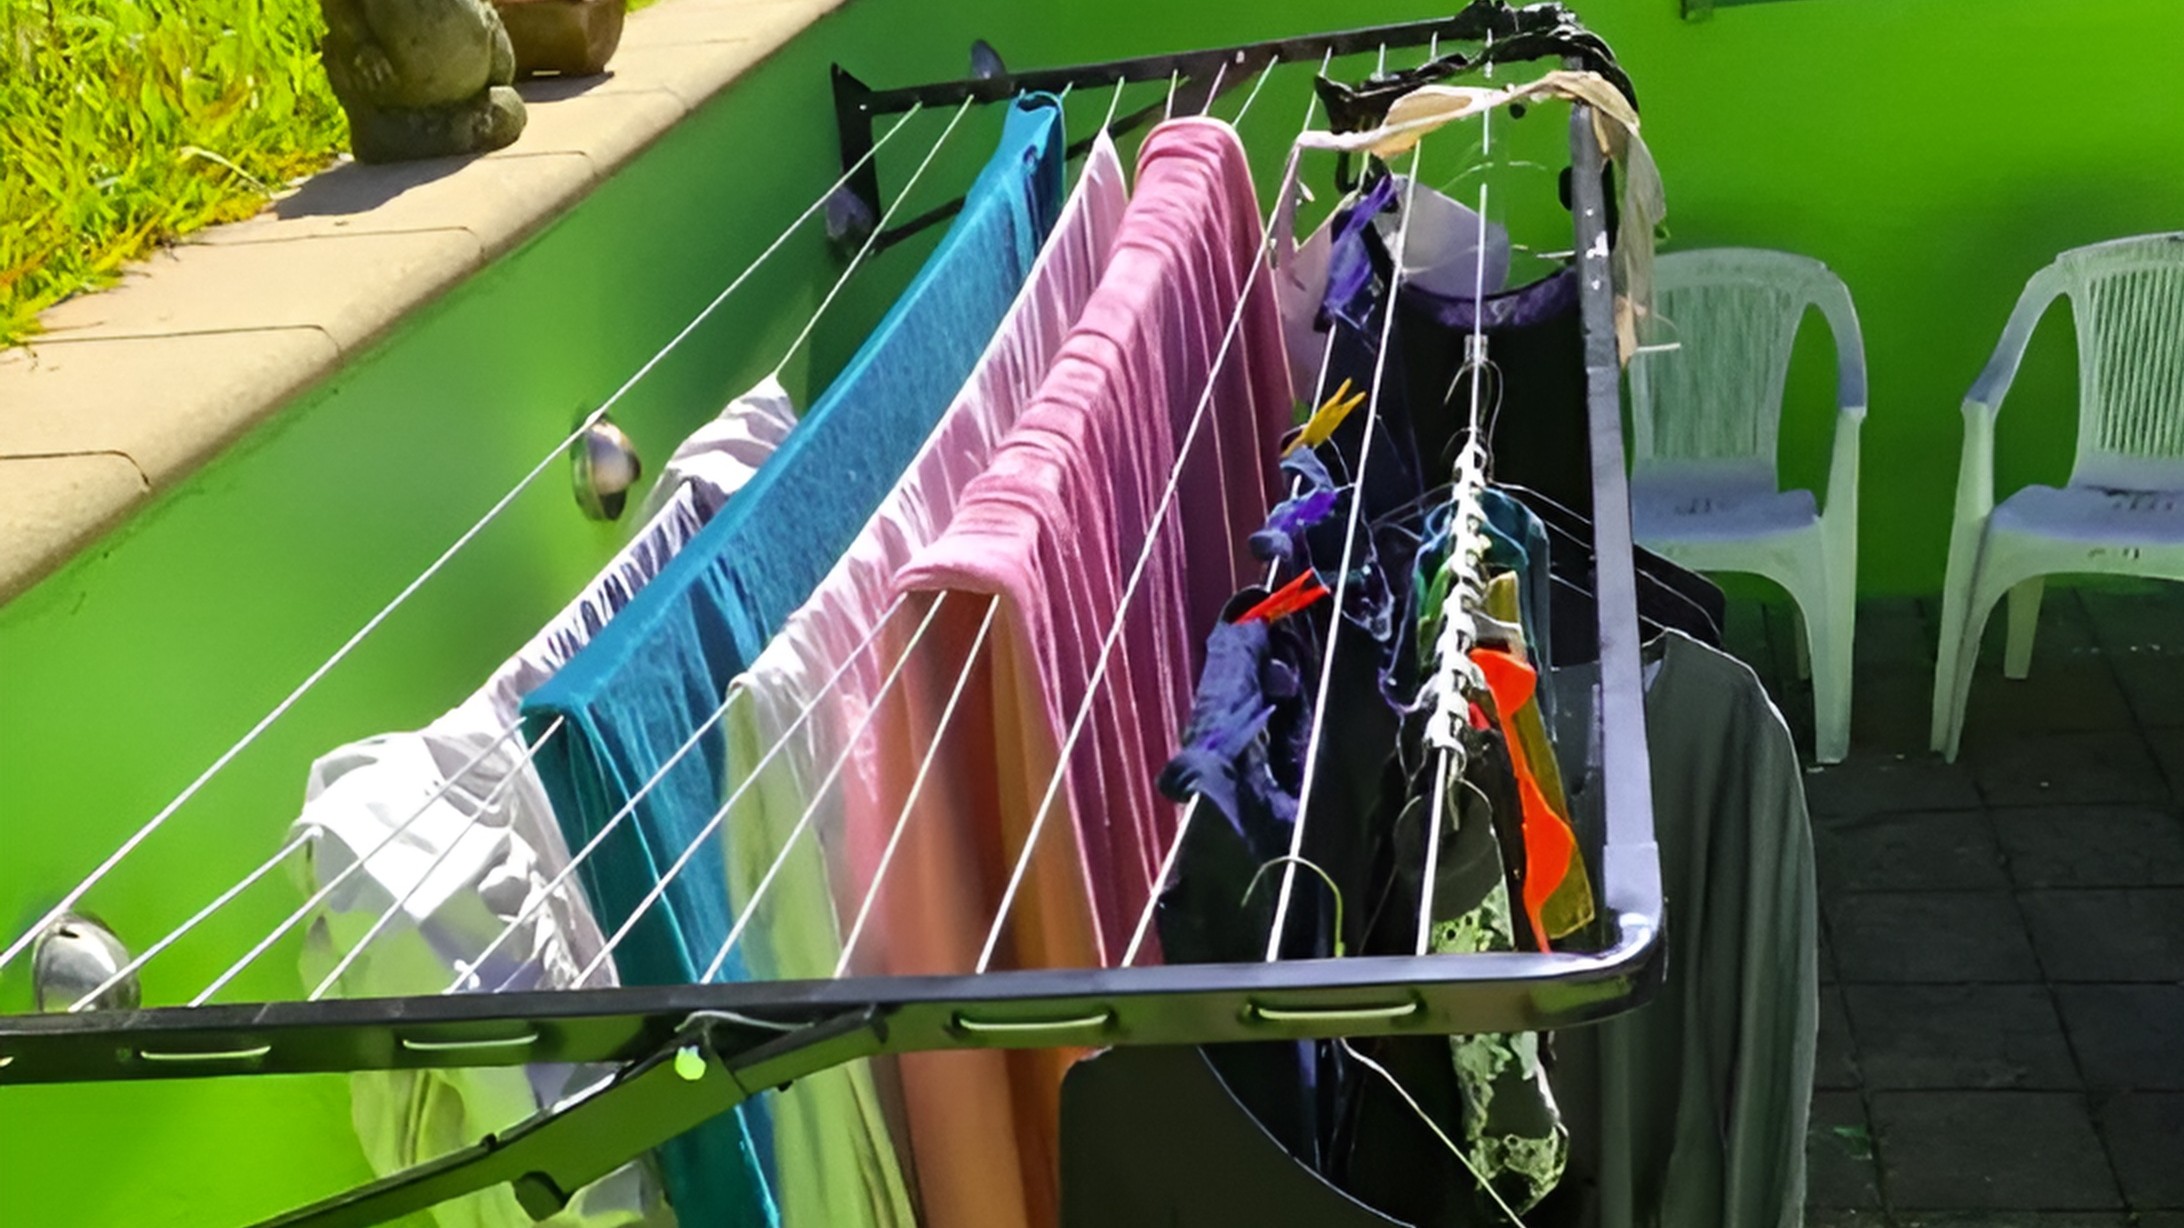 Heavy Duty Fold Down Clothesline Tailored Options for Every Household Size